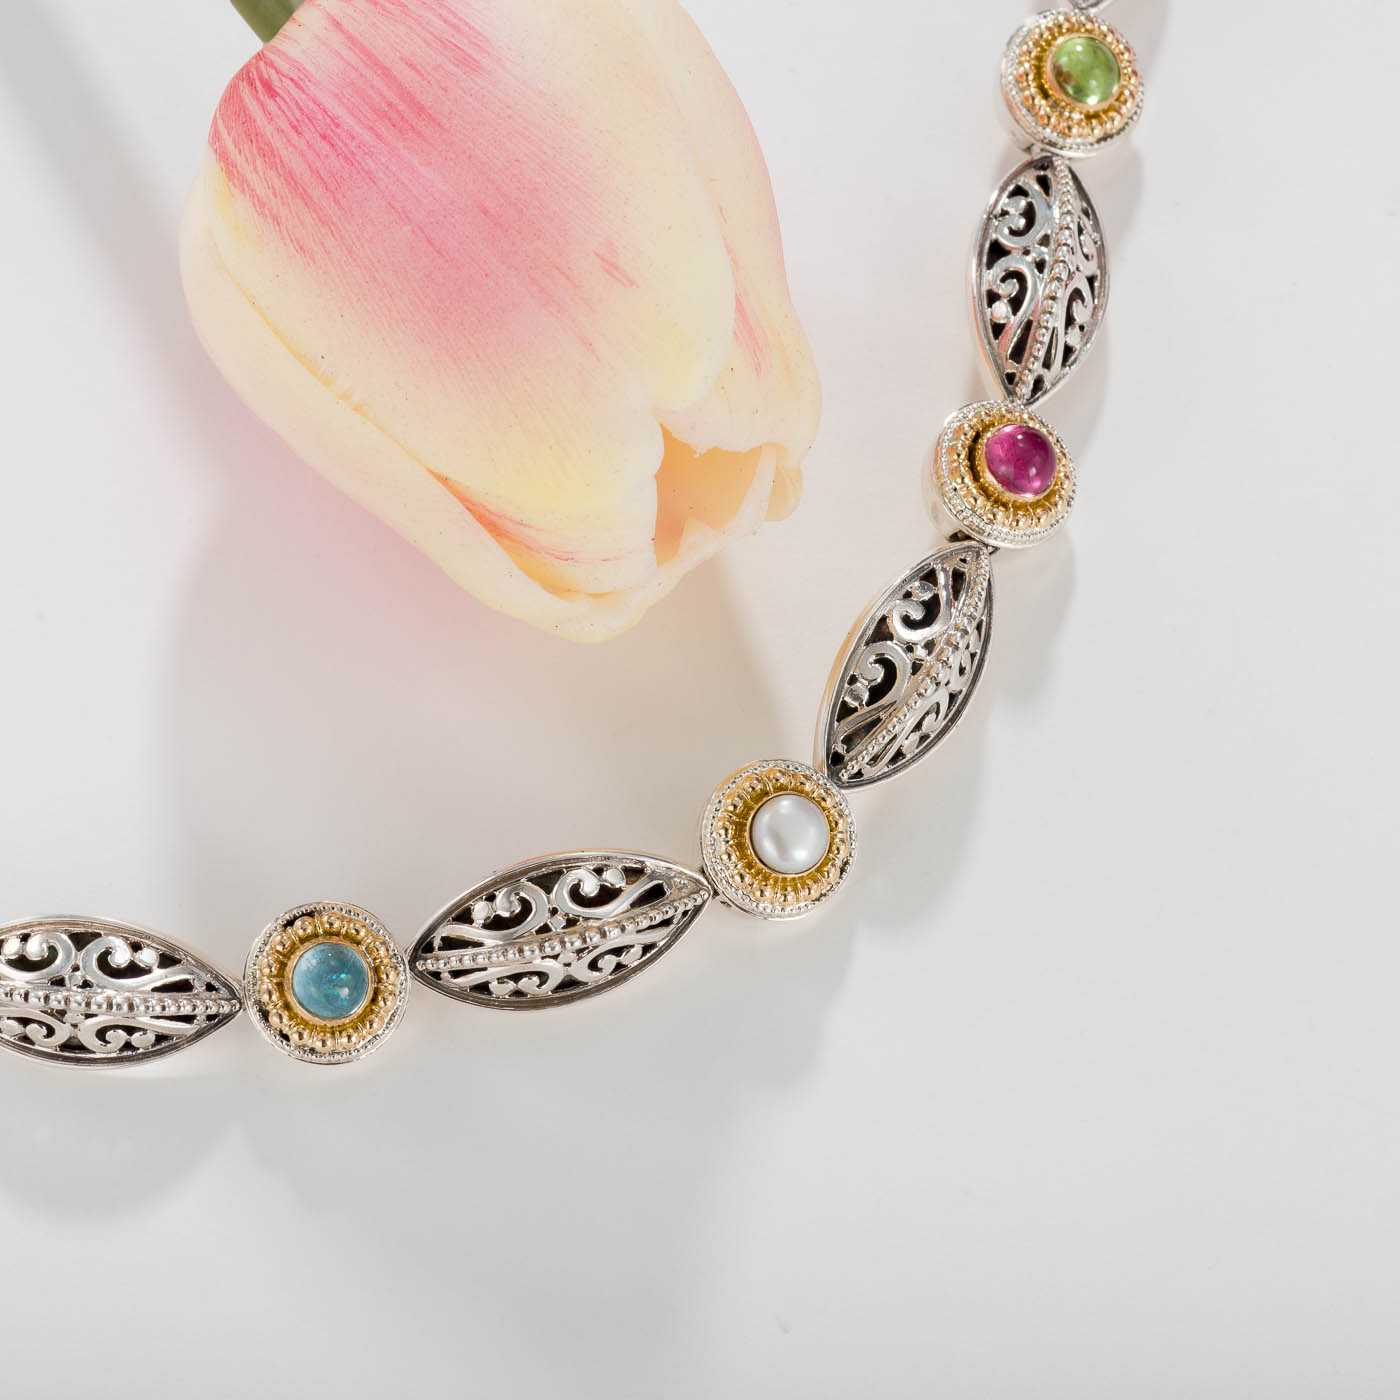 Athenian Flower Necklace in 18K Gold and Sterling Silver with Semi precious stones